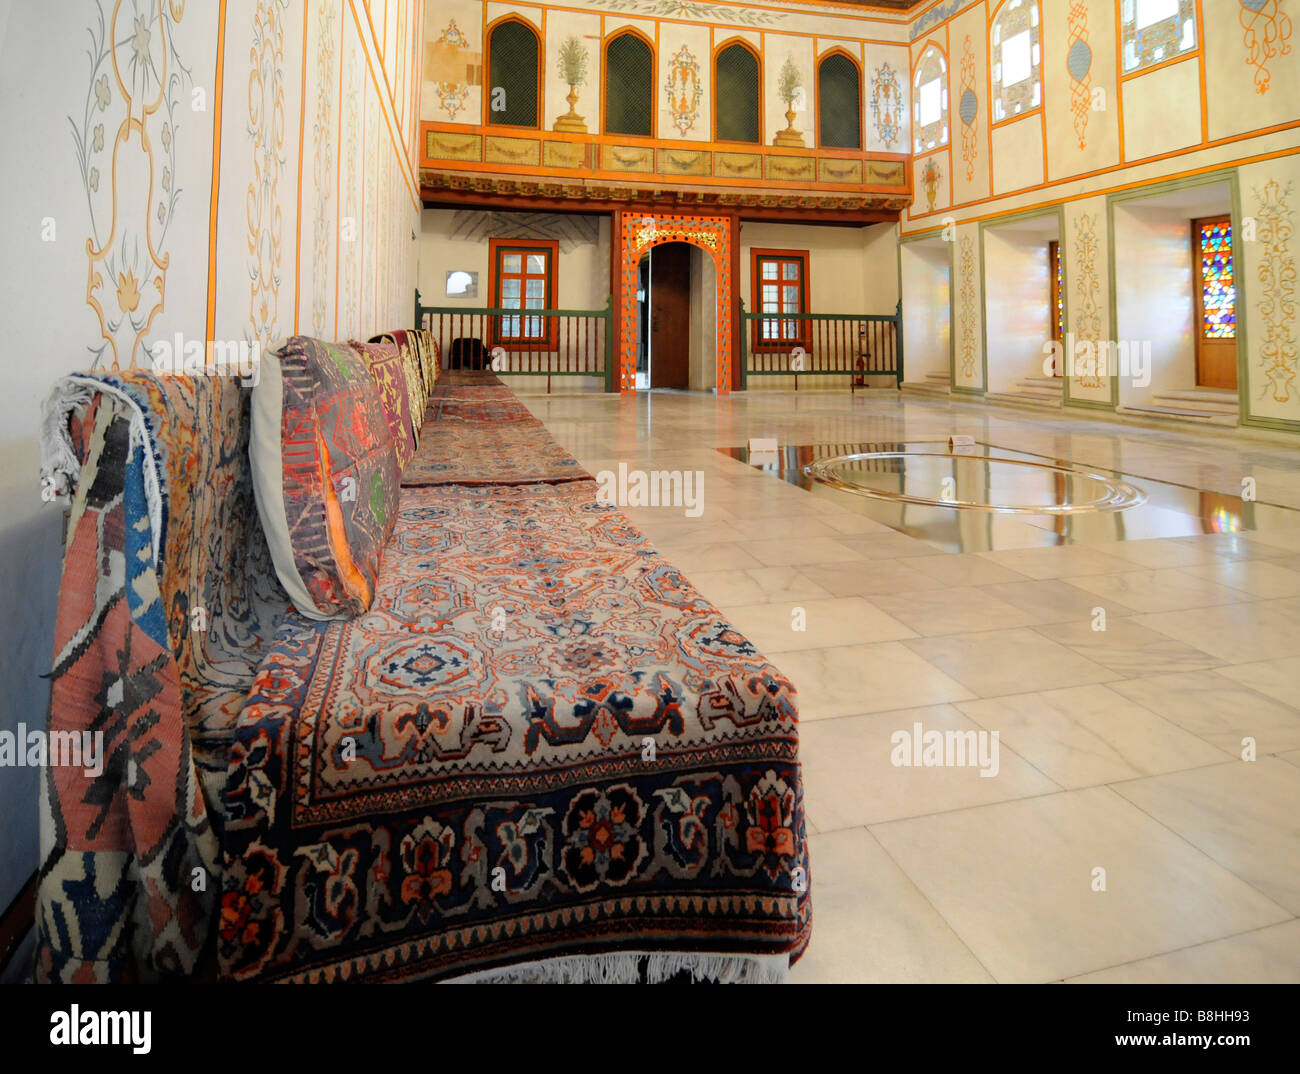 Interior of the former Palace of the Crimean Khans in Bakhchisaray, Crimea, Ukraine. Stock Photo